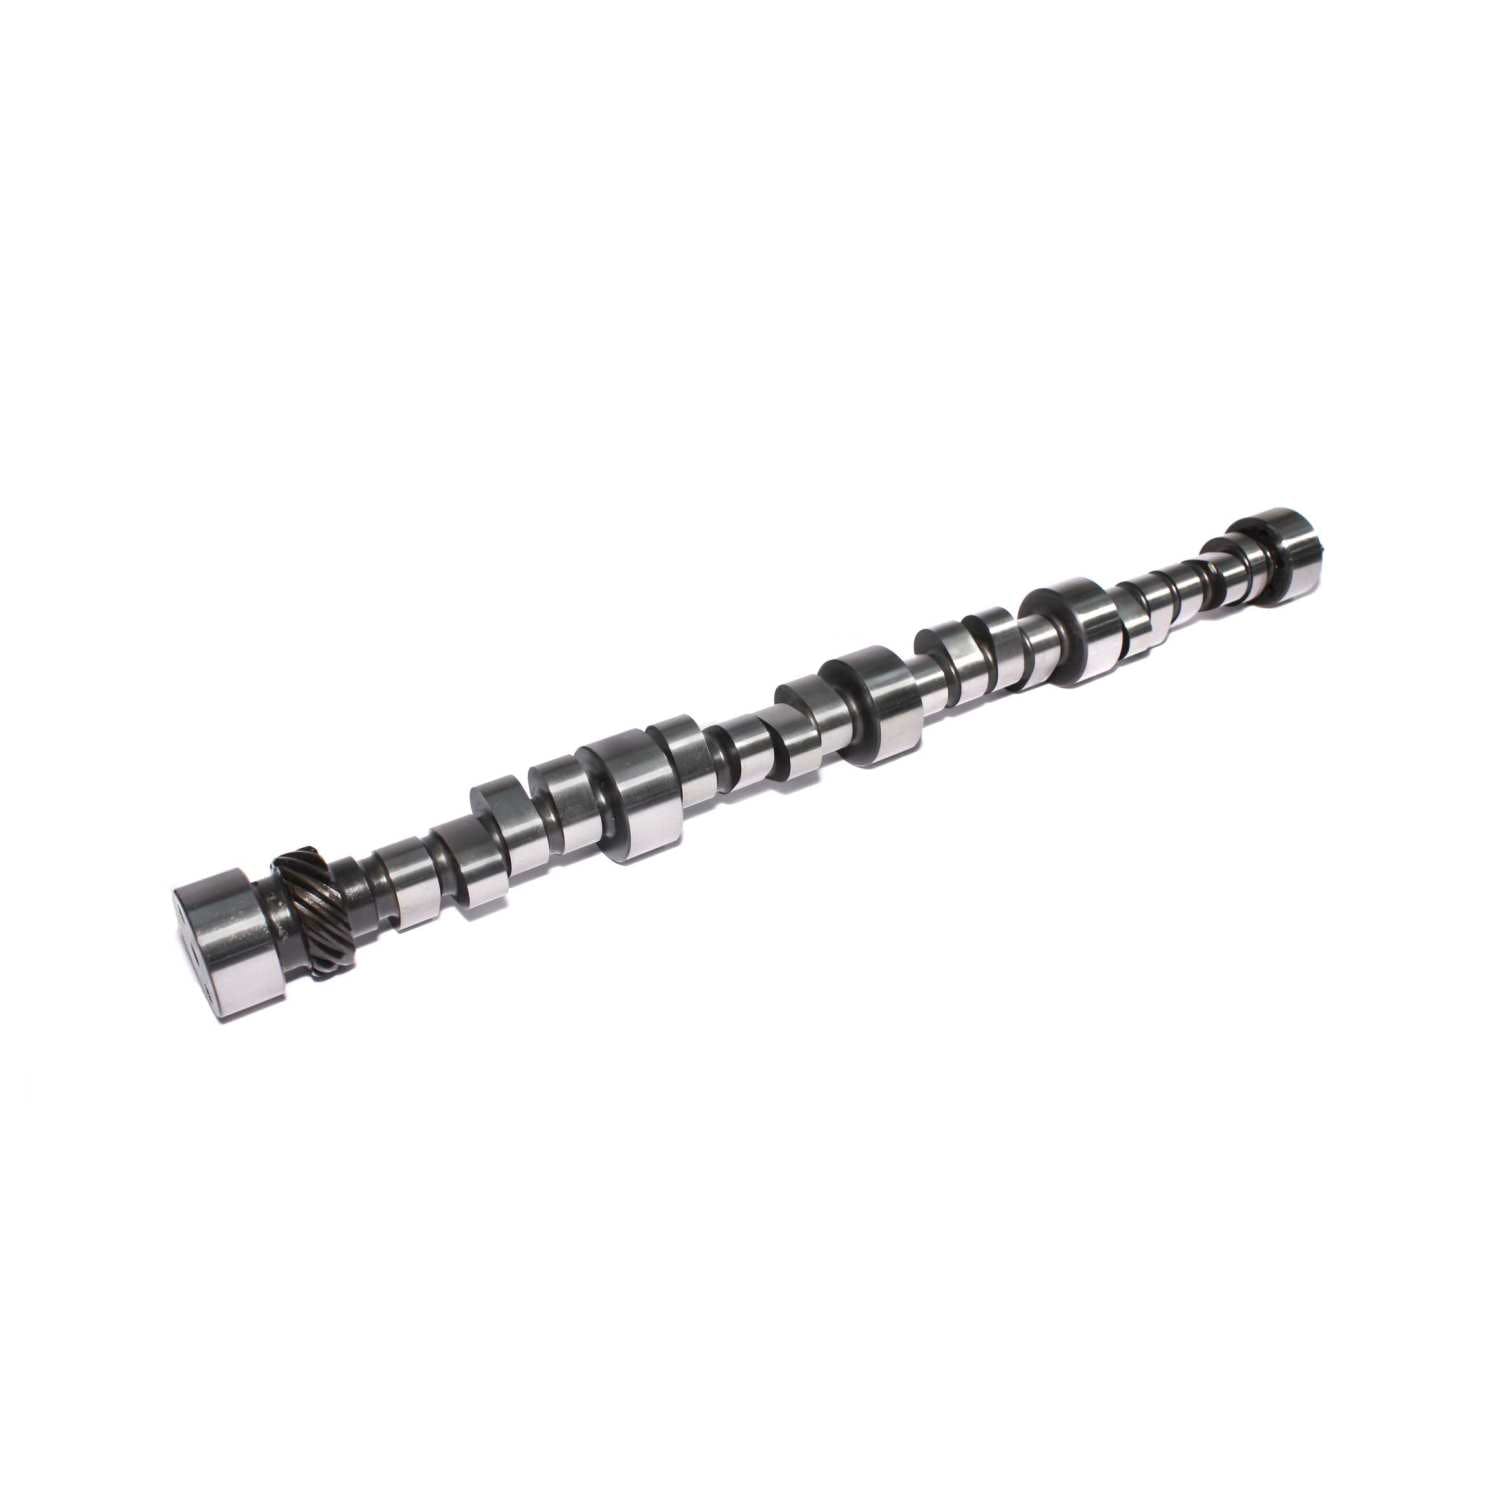 Competition Cams 11-725-9 Drag Race Camshaft